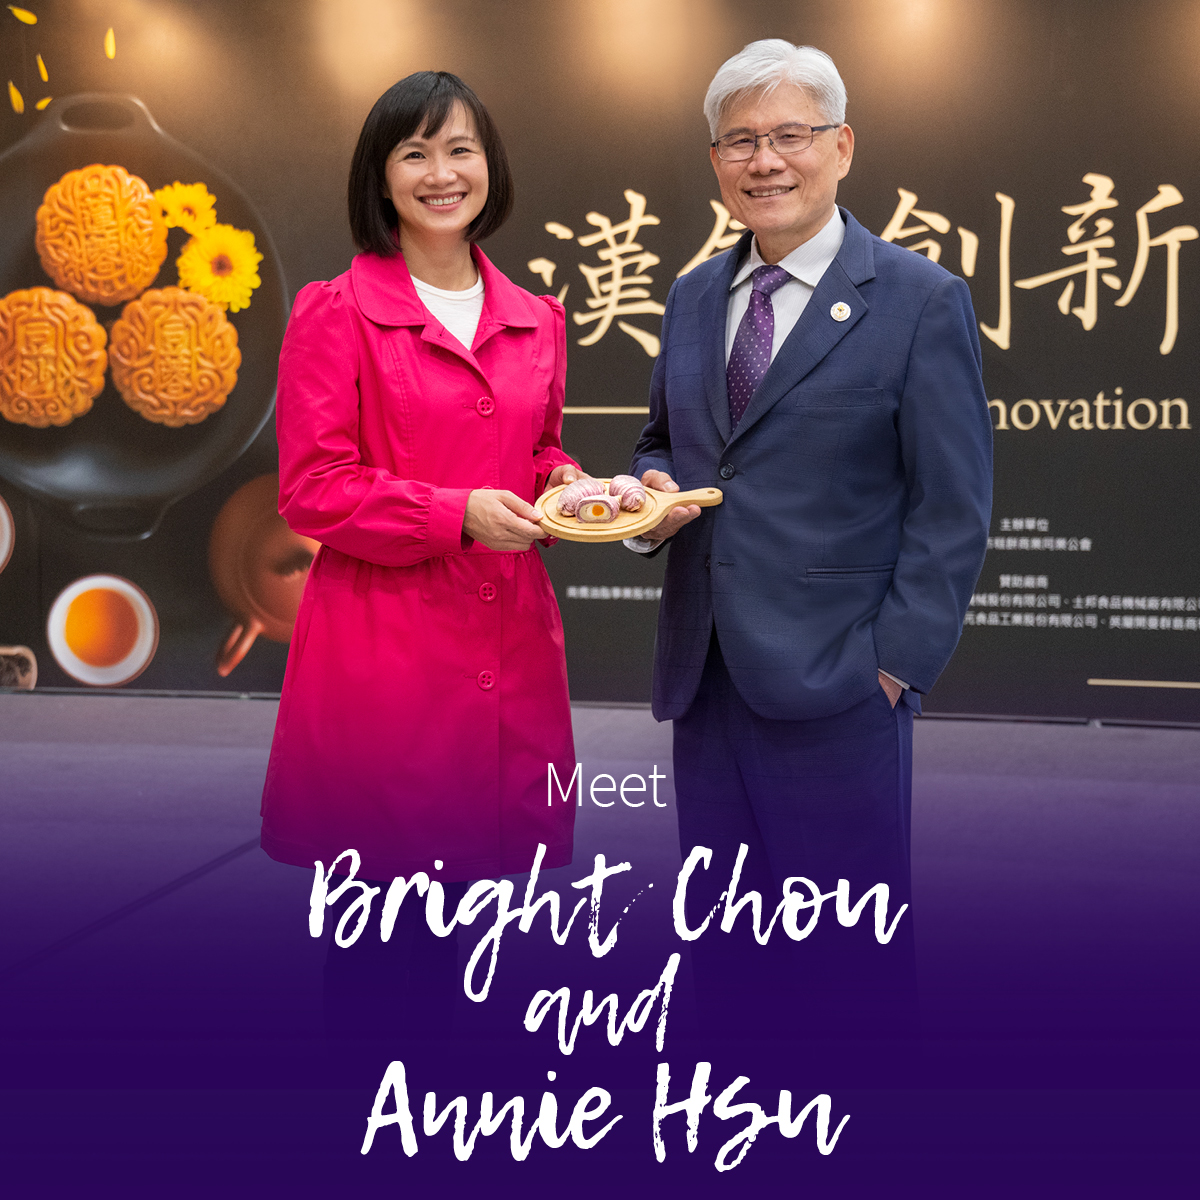 See how Bright Chou and Annie Hsu are propelling Taiwan’s pastry industry to exciting new frontiers tonight on Meet a Scientologist! Premieres at 8P⁠ ET/PT. scientology.tv/brightannie #meetascientologist #taichung #taiwanpastry #pastryfilling #pastrypassion